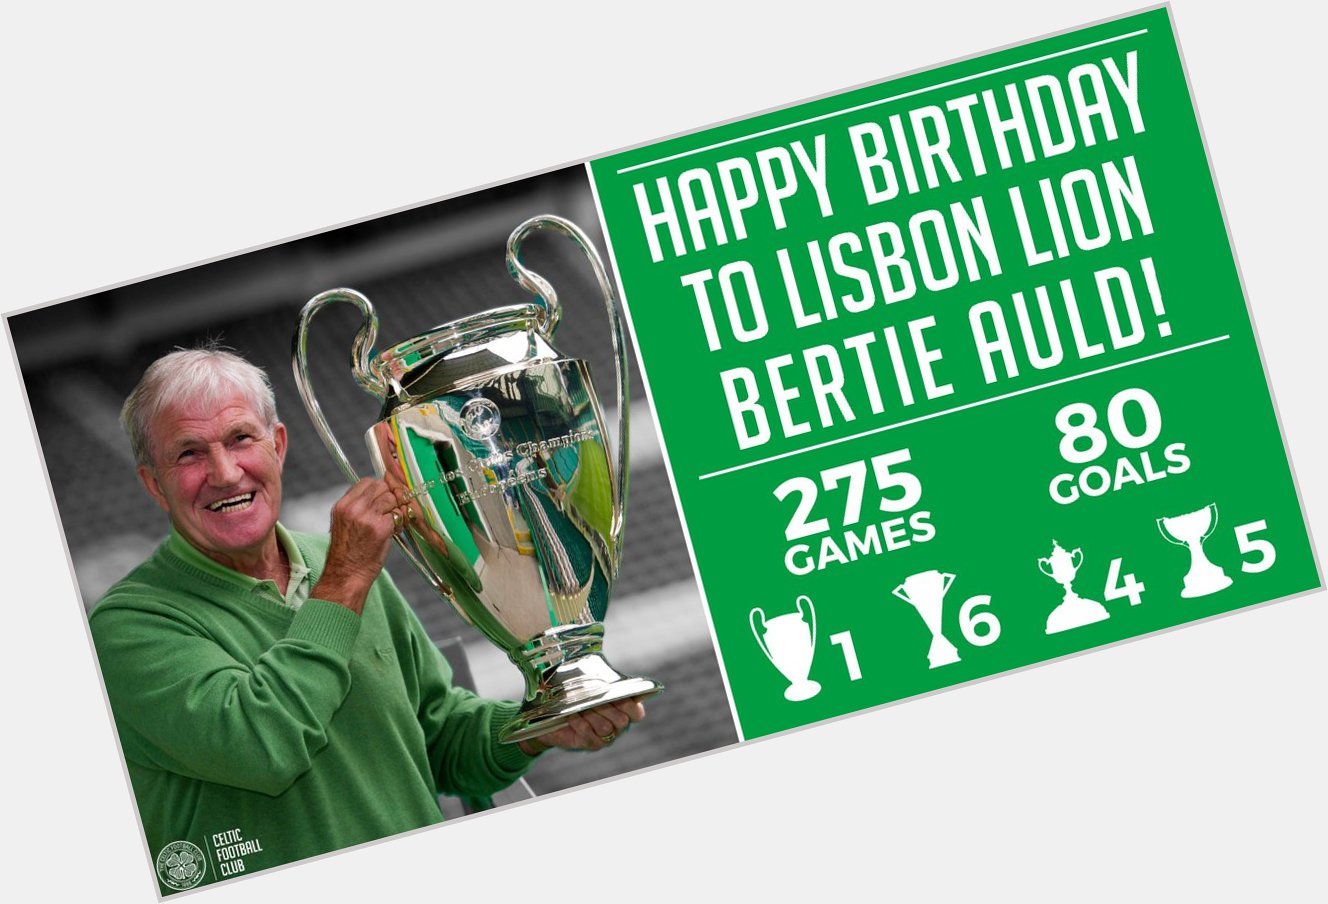   Today we wish a happy 8 0 th birthday to legend and Lisbon Lion, Bertie Auld! 